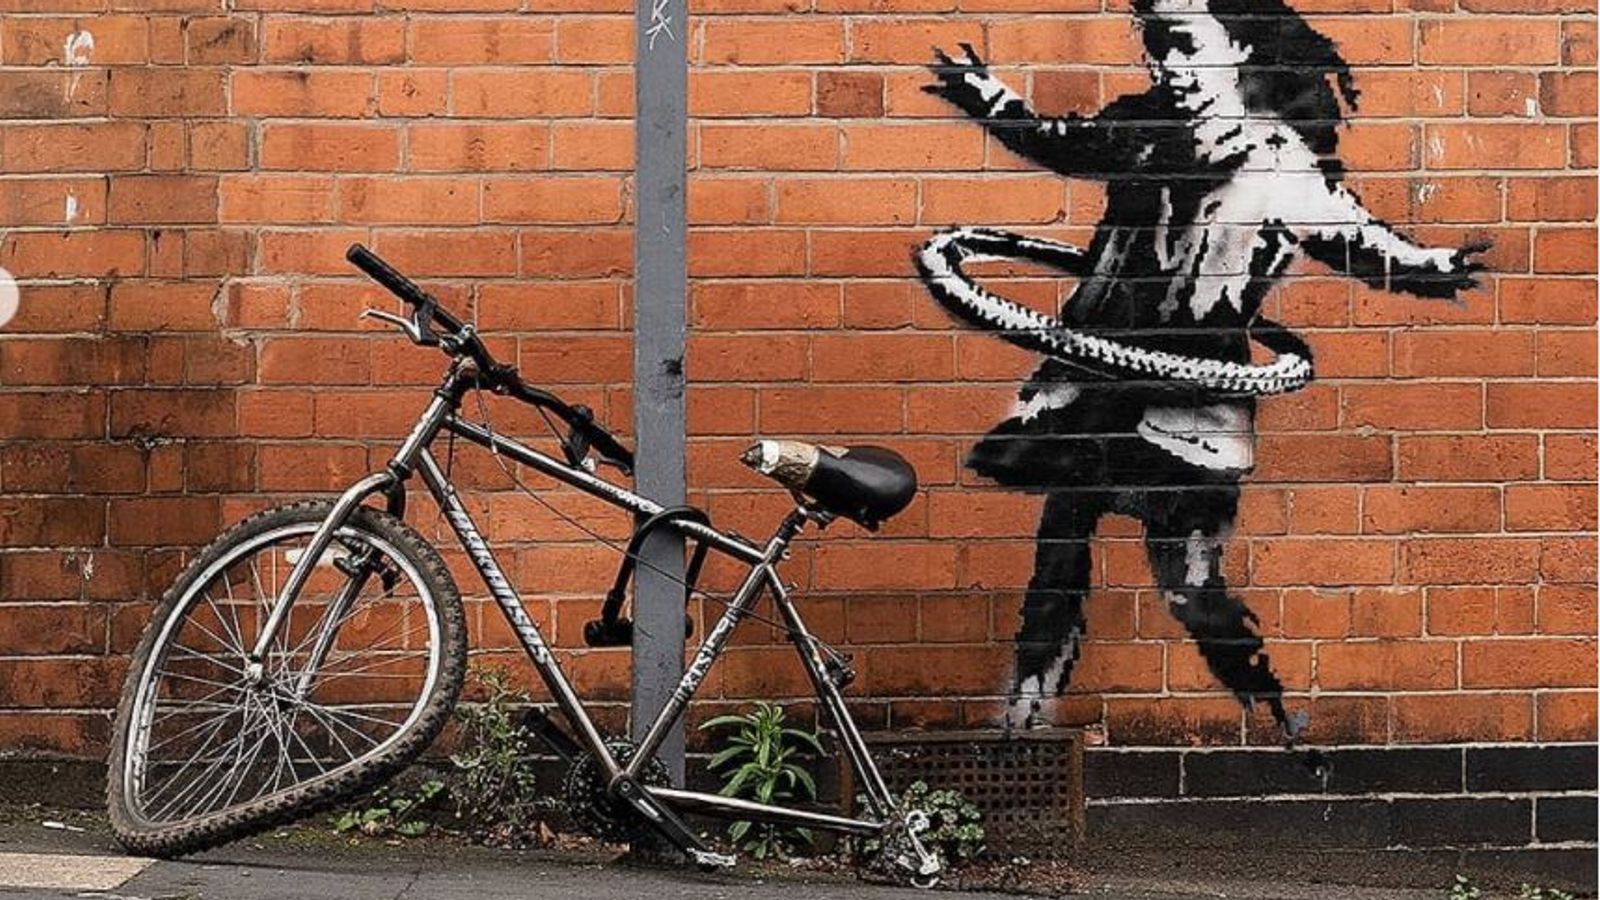 Banksy Wallpaper Iphone posted by Michelle Walker